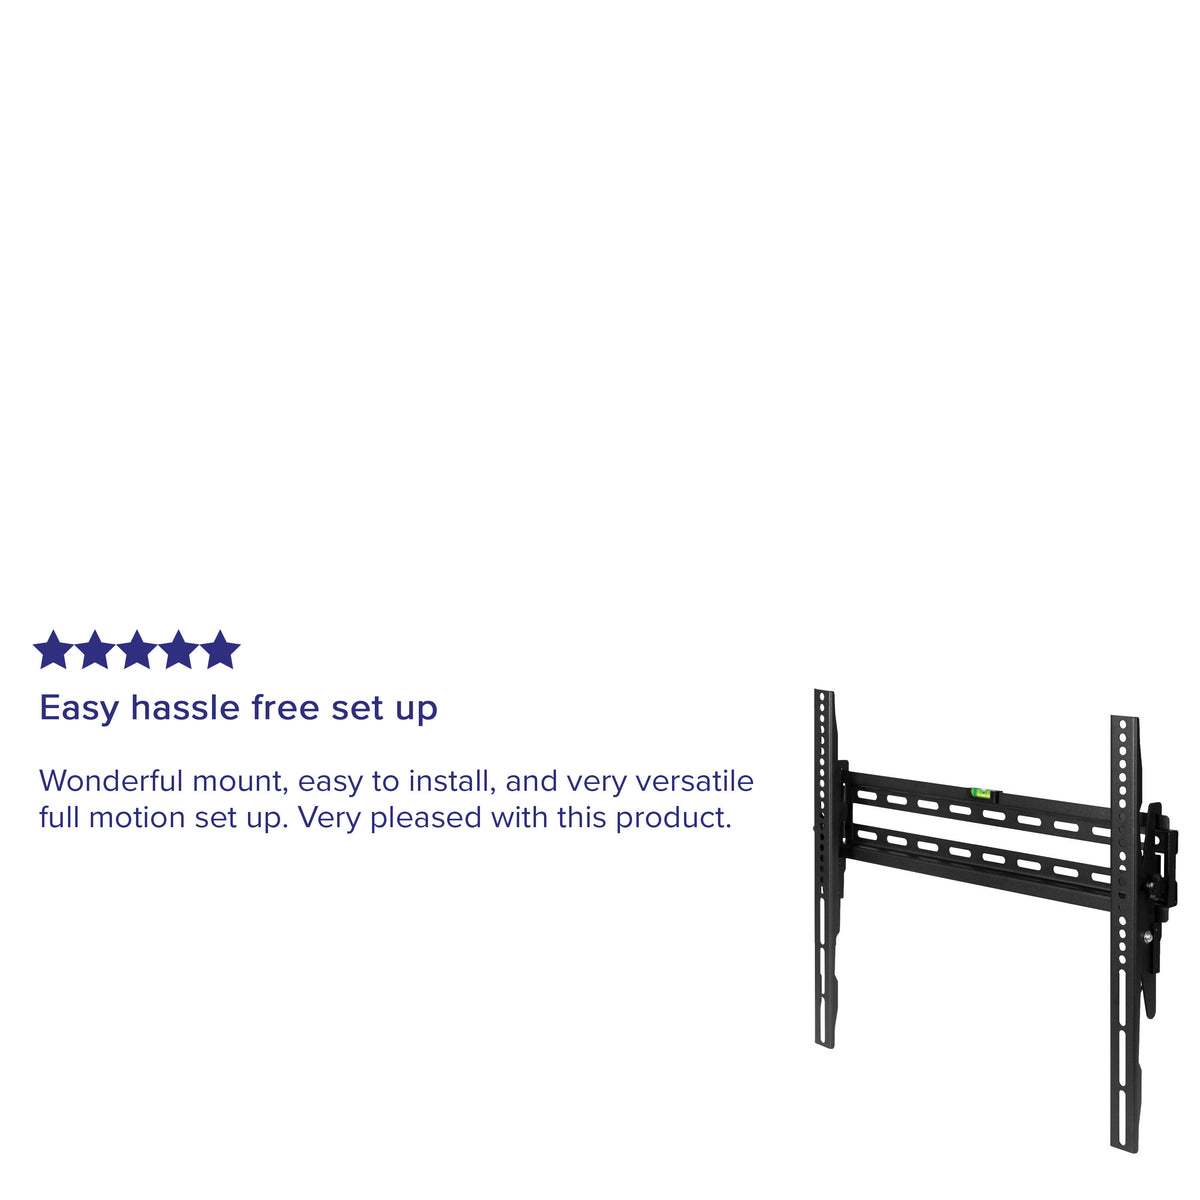 40"-84" TV |#| 40"-84" Tilt TV Wall Mount-Built-In Level-Weight Capacity Up to 140 lbs.